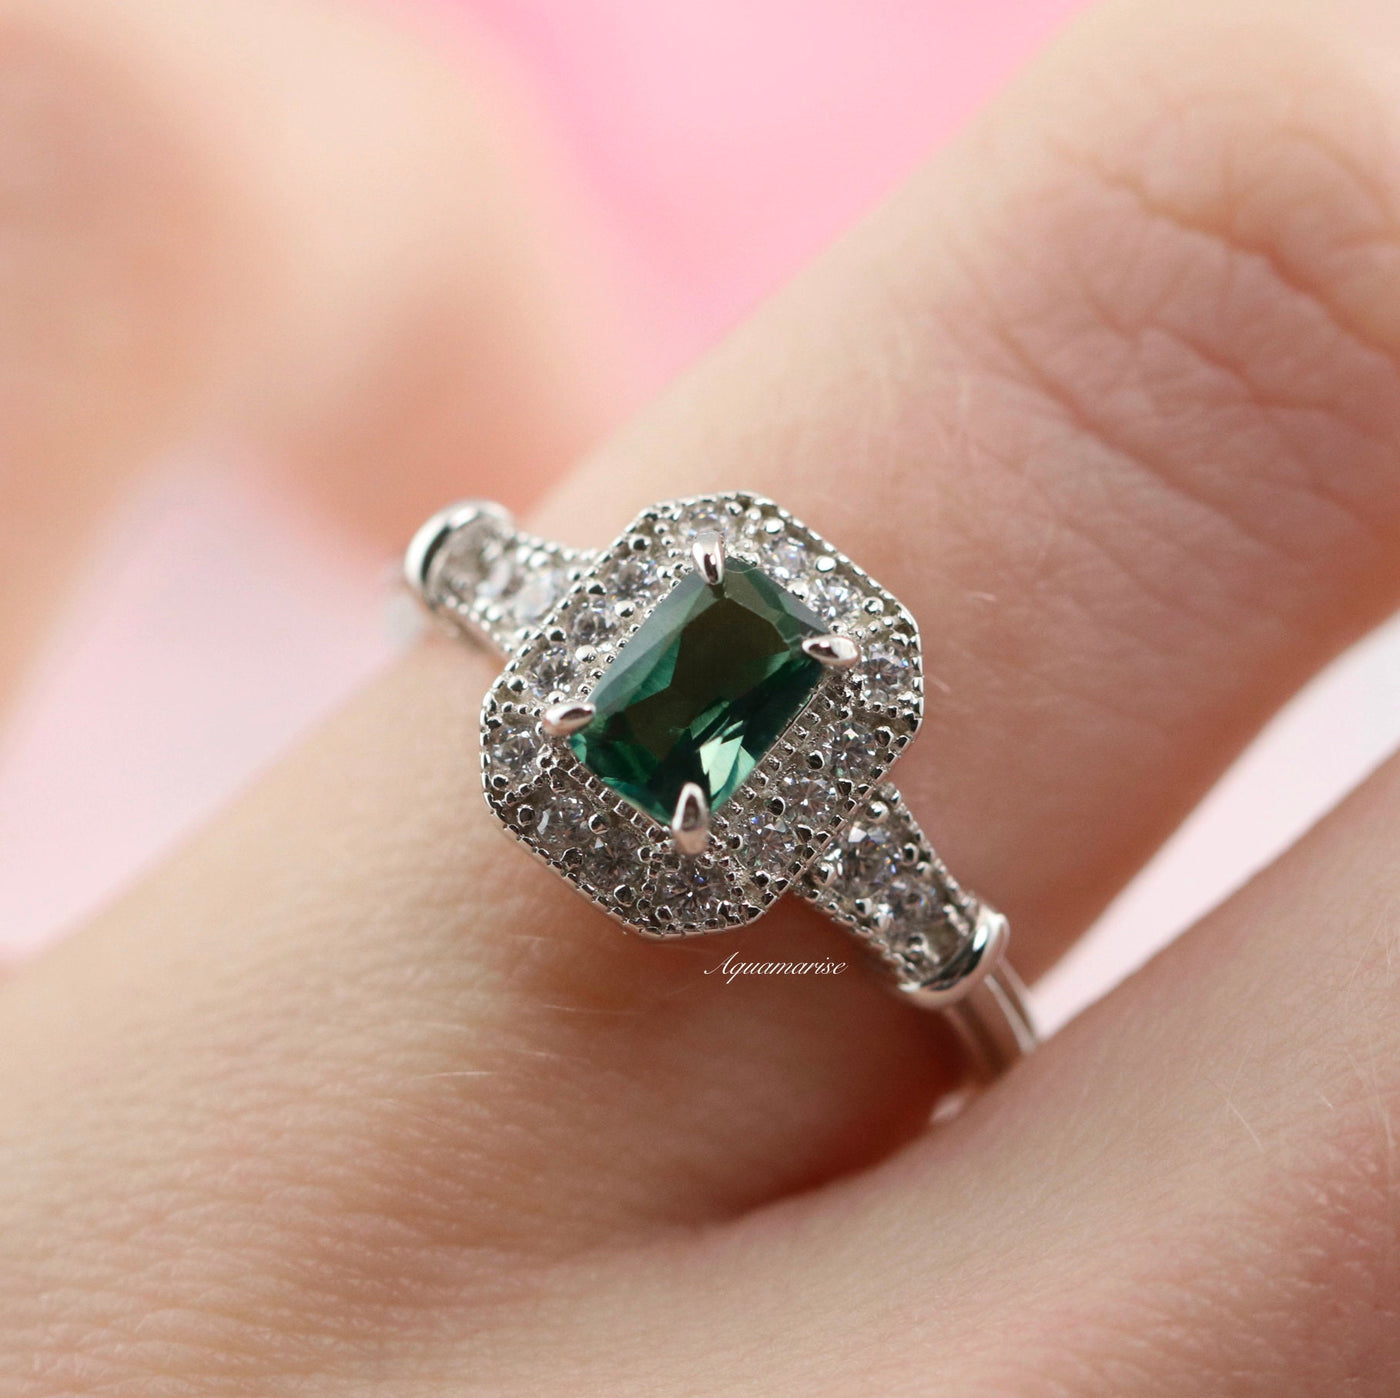 Cynthia Teal Sapphire Ring- Sterling Silver Vintage Forest Green Sapphire Engagement Rings